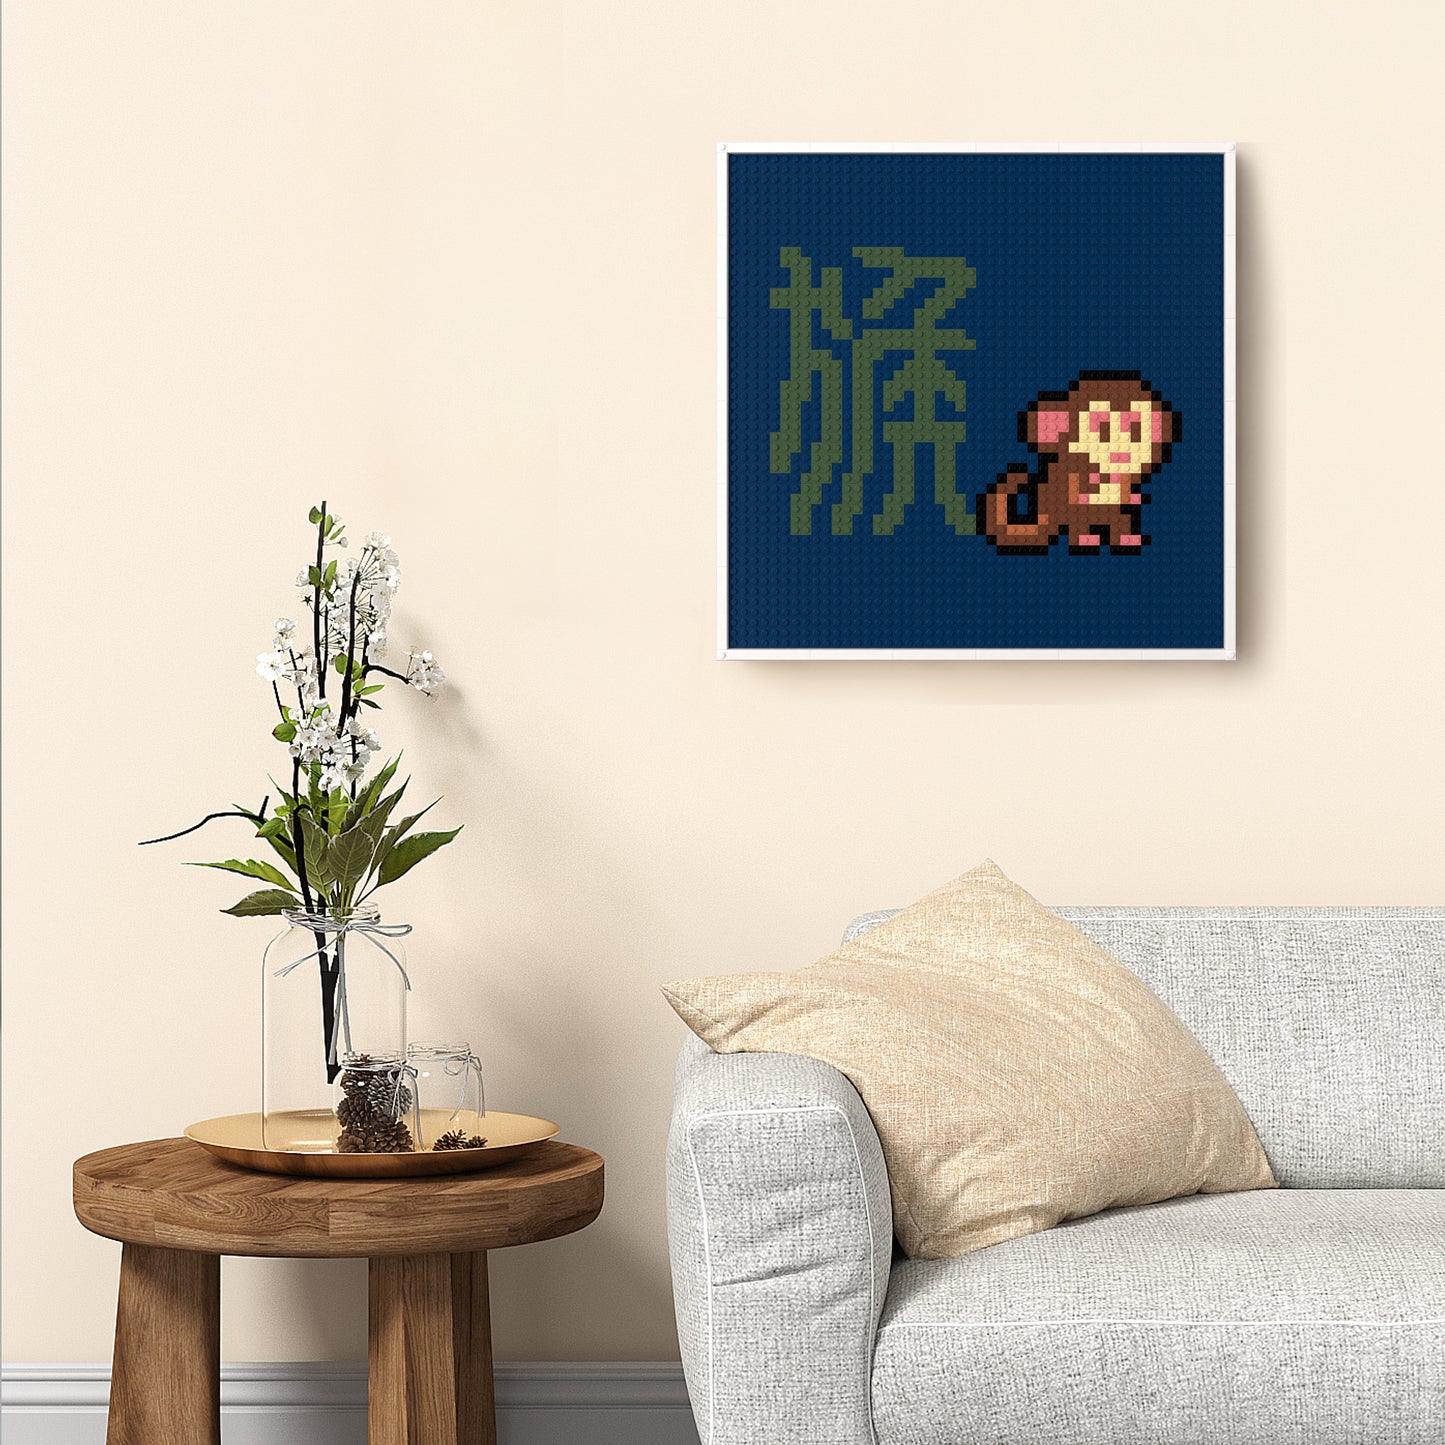 48*48 Dot Handmade Building Brick Pixel Art Chinese Zodiac Monkey Customized Chinese Traditional Culture Artwork Best Gift for Friends of Monkey